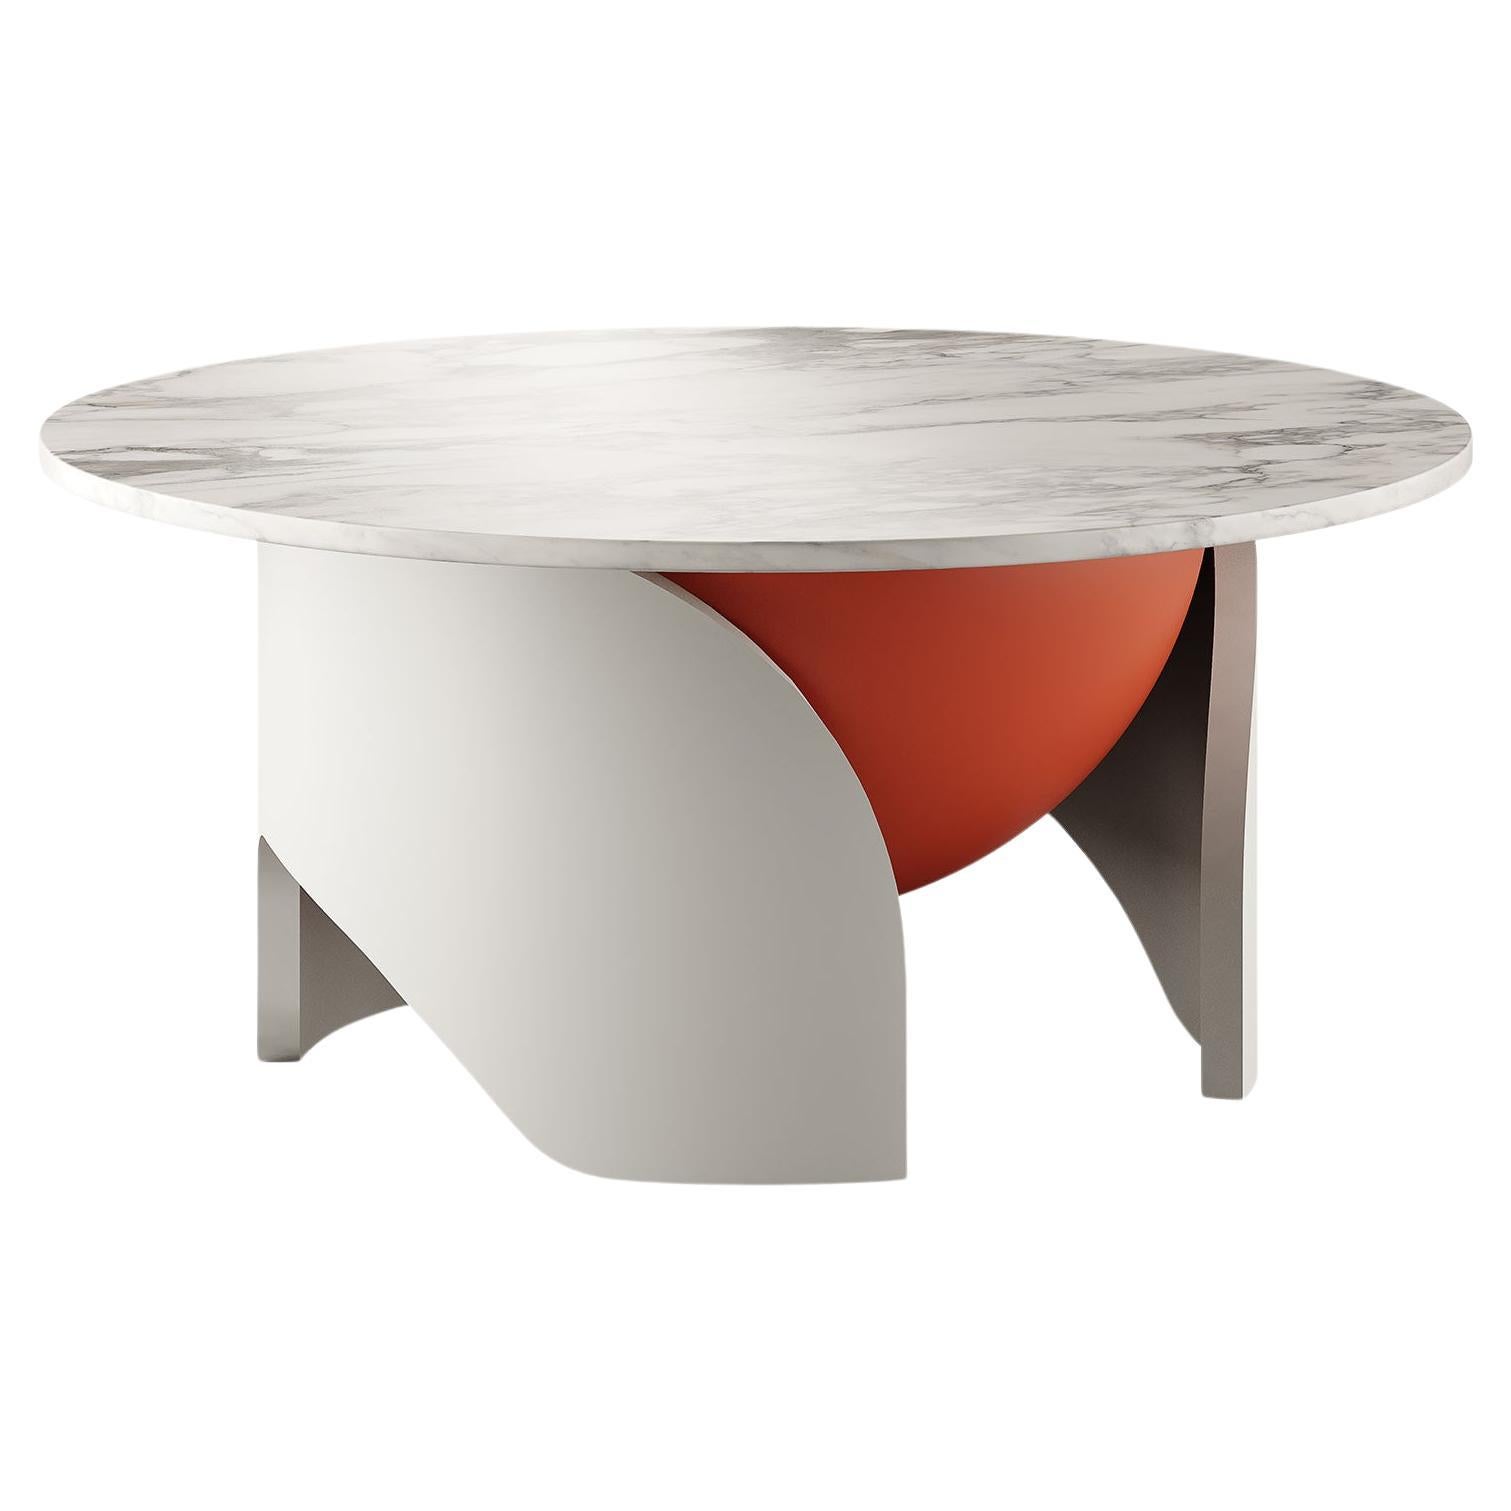 Modern Round Center Table Calacatta White Marble Top Grey & Orange Matte Lacquer For Sale